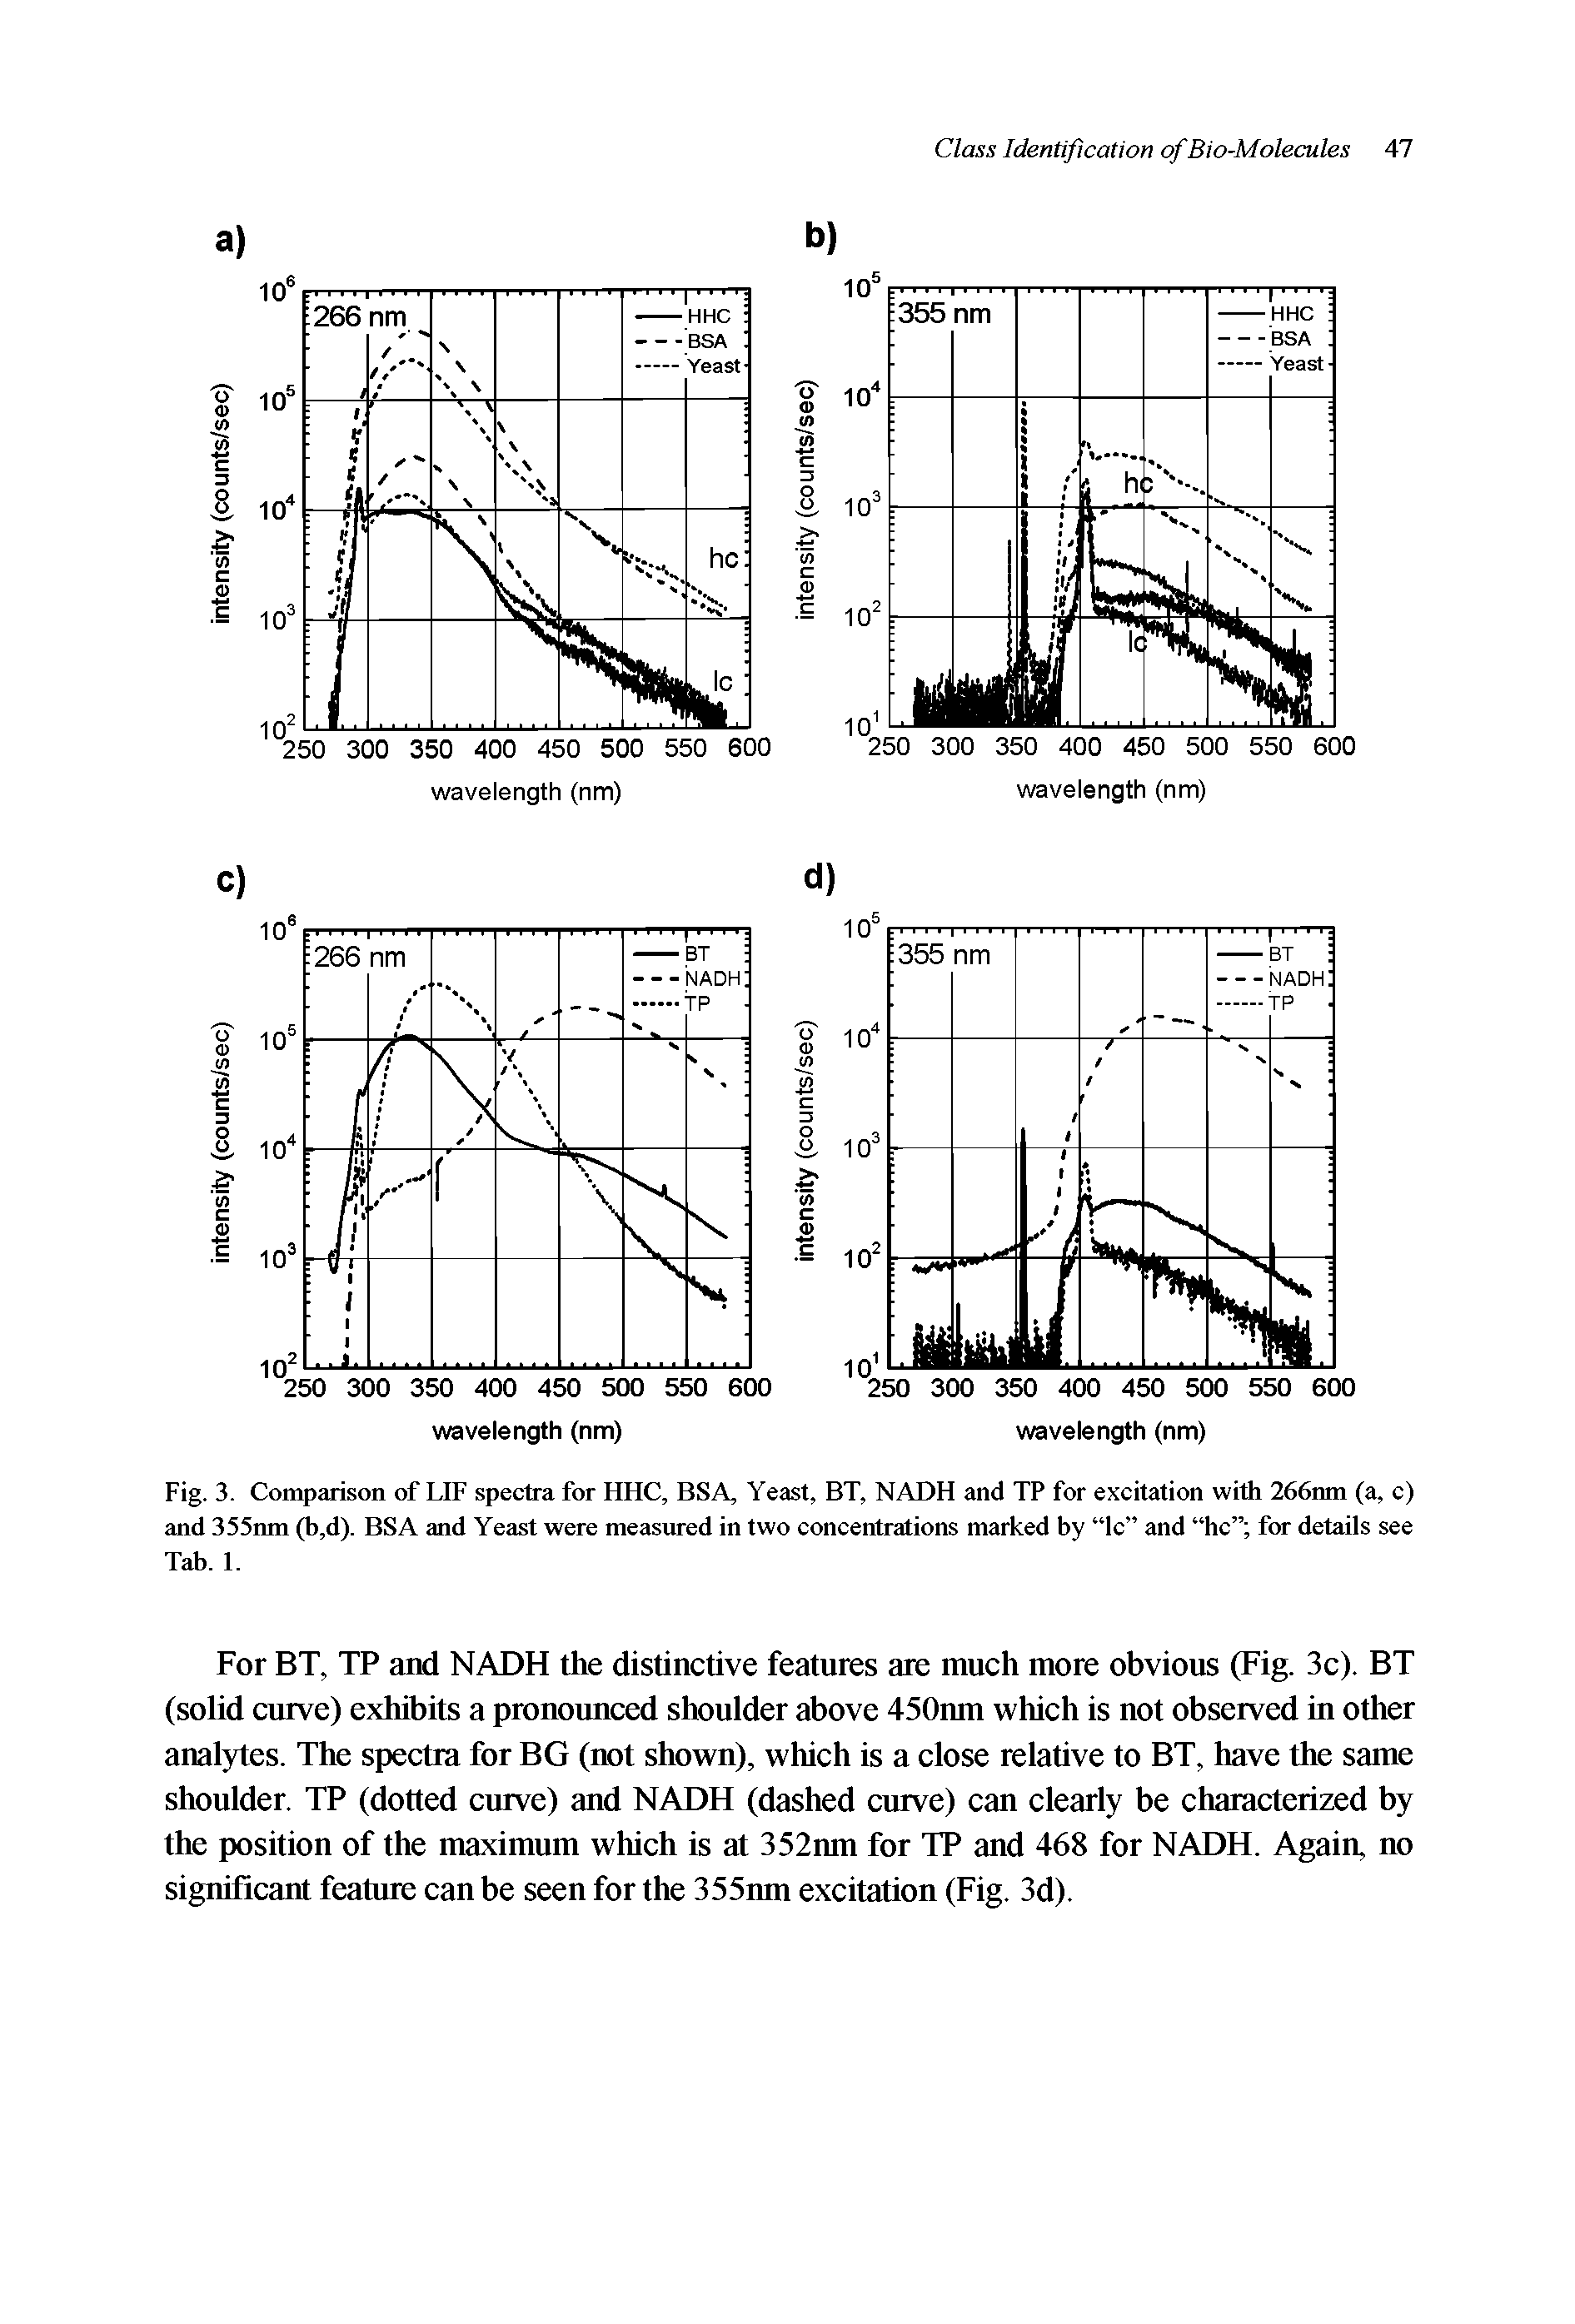 Fig. 3. Comparison of LIF spectra for FIFIC, BSA, Yeast, BT, NADH and TP for excitation with 266nm (a, c) and 355nm (b,d). BSA and Yeast were measured in two concentrations marked by Ic and he for details see Tab. 1.